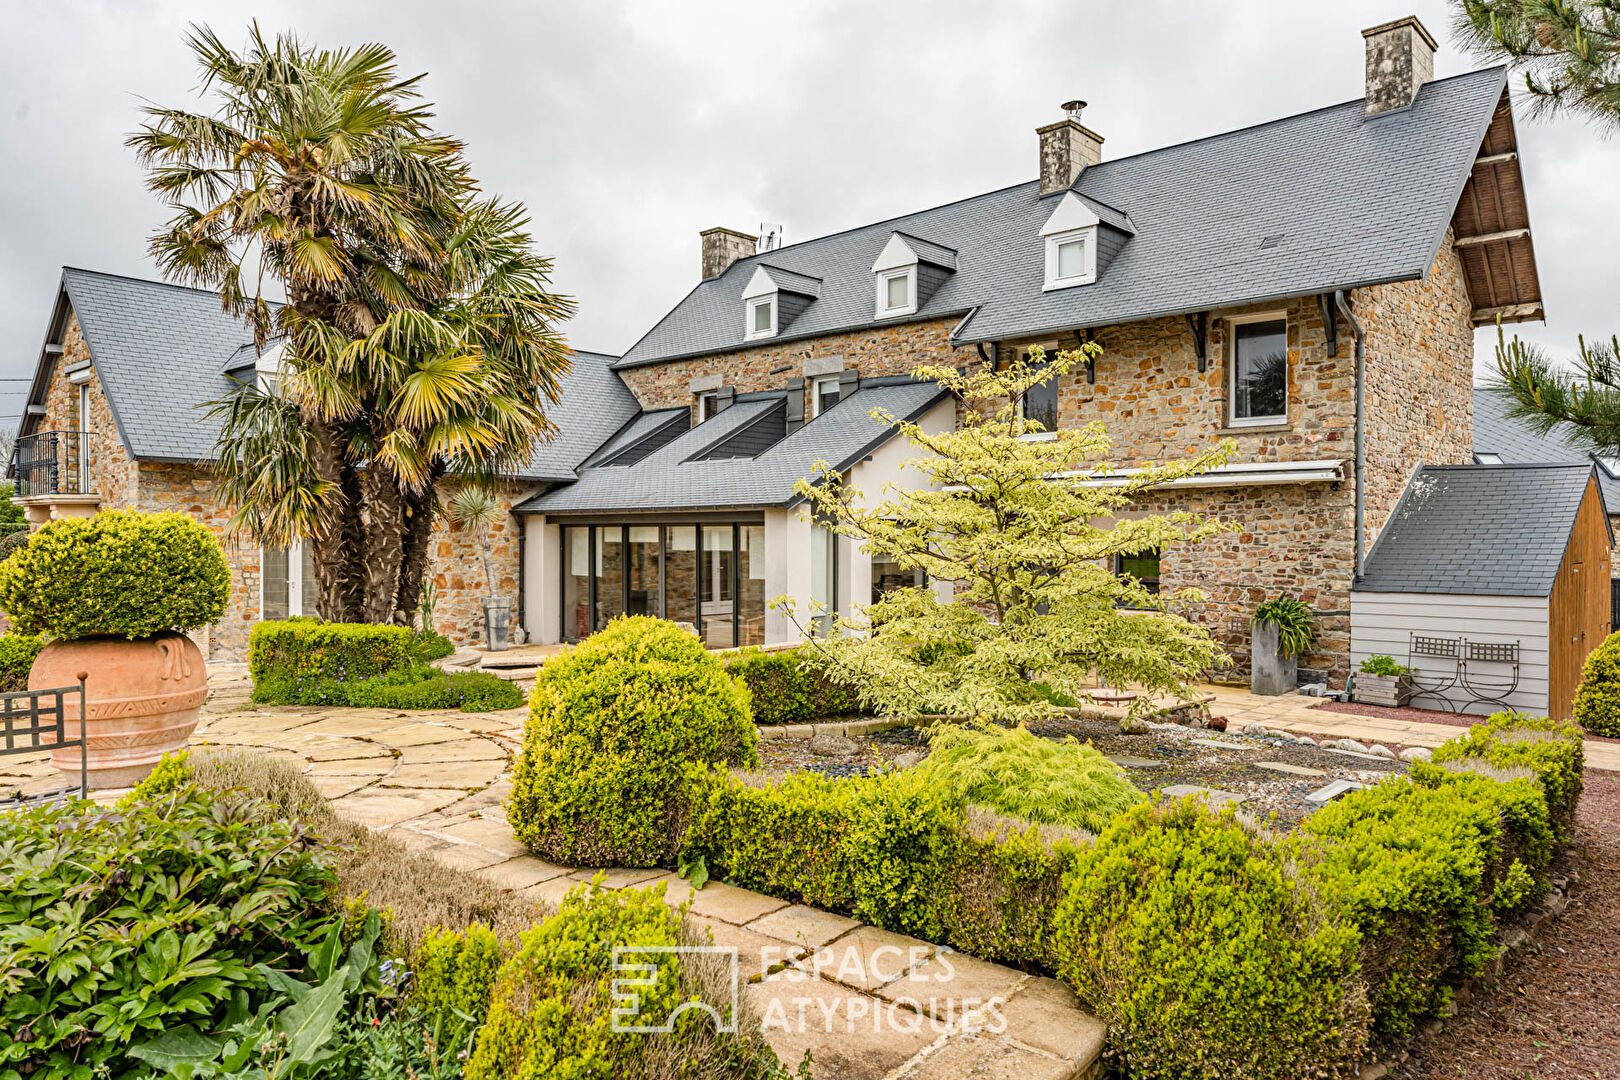 Magnificent stone residence in Saint Germain sur Ay